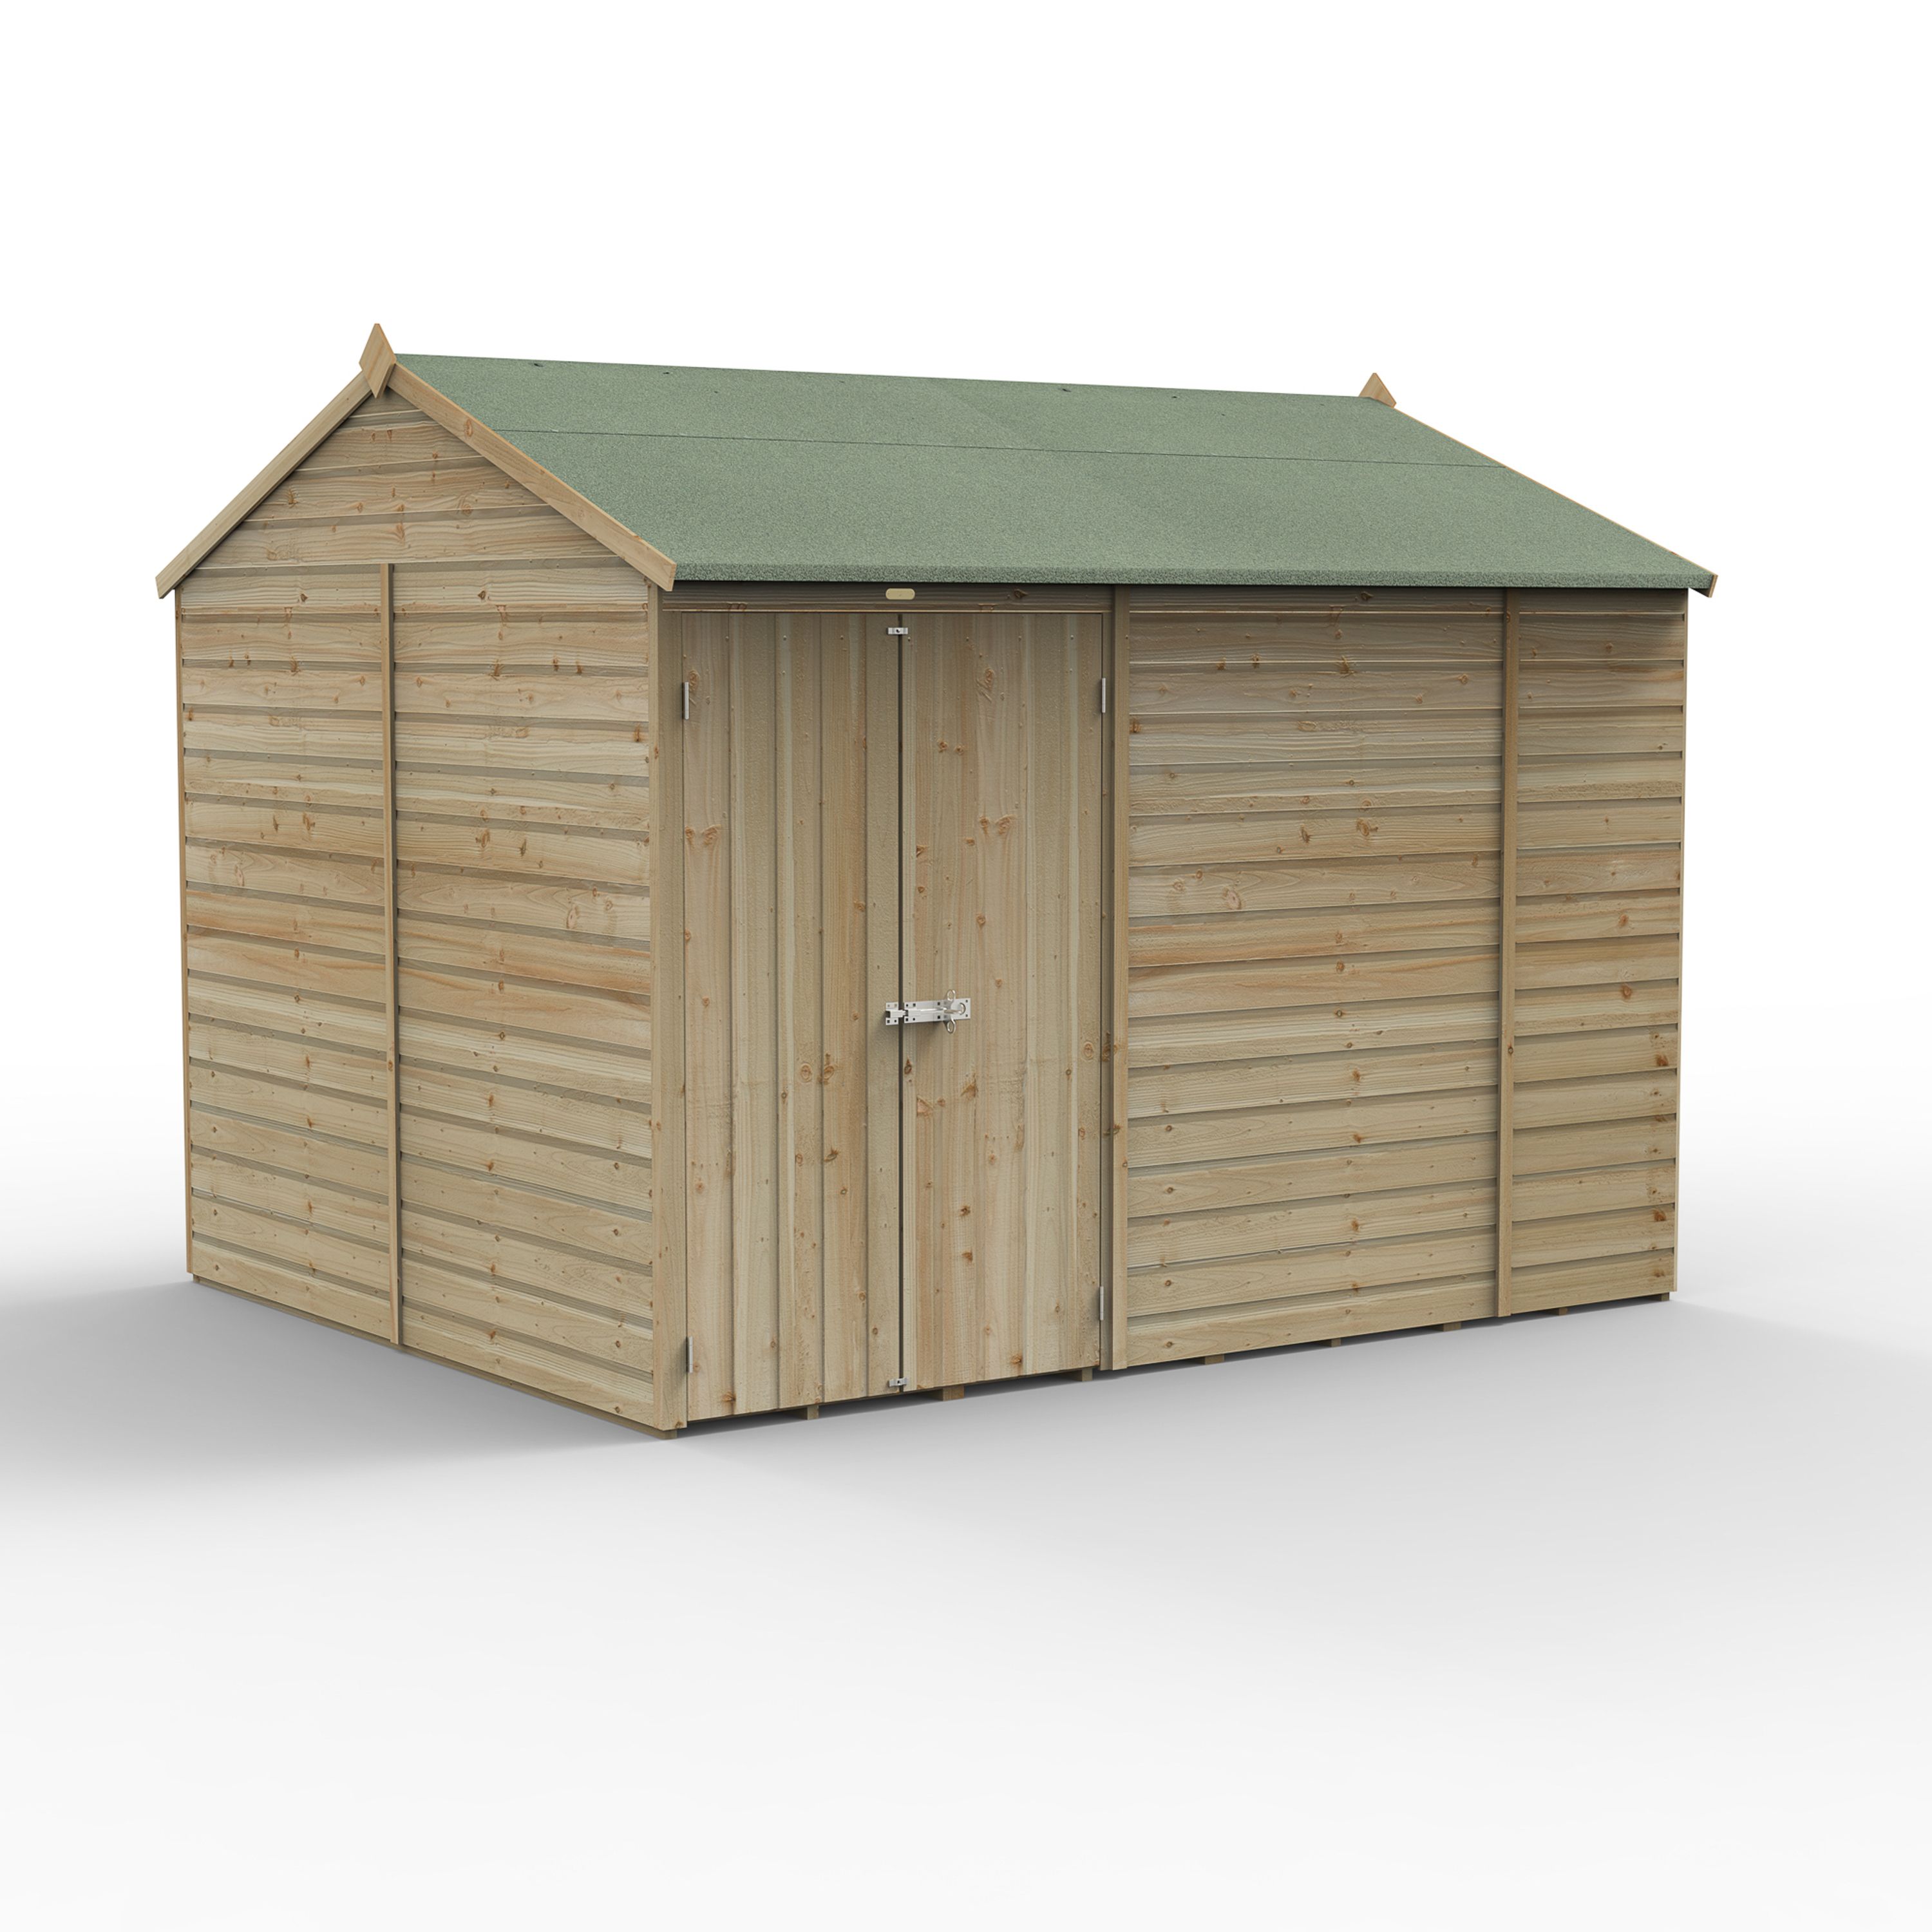 Forest Garden Beckwood 10x8 ft Reverse apex Natural timber Wooden 2 door Shed with floor